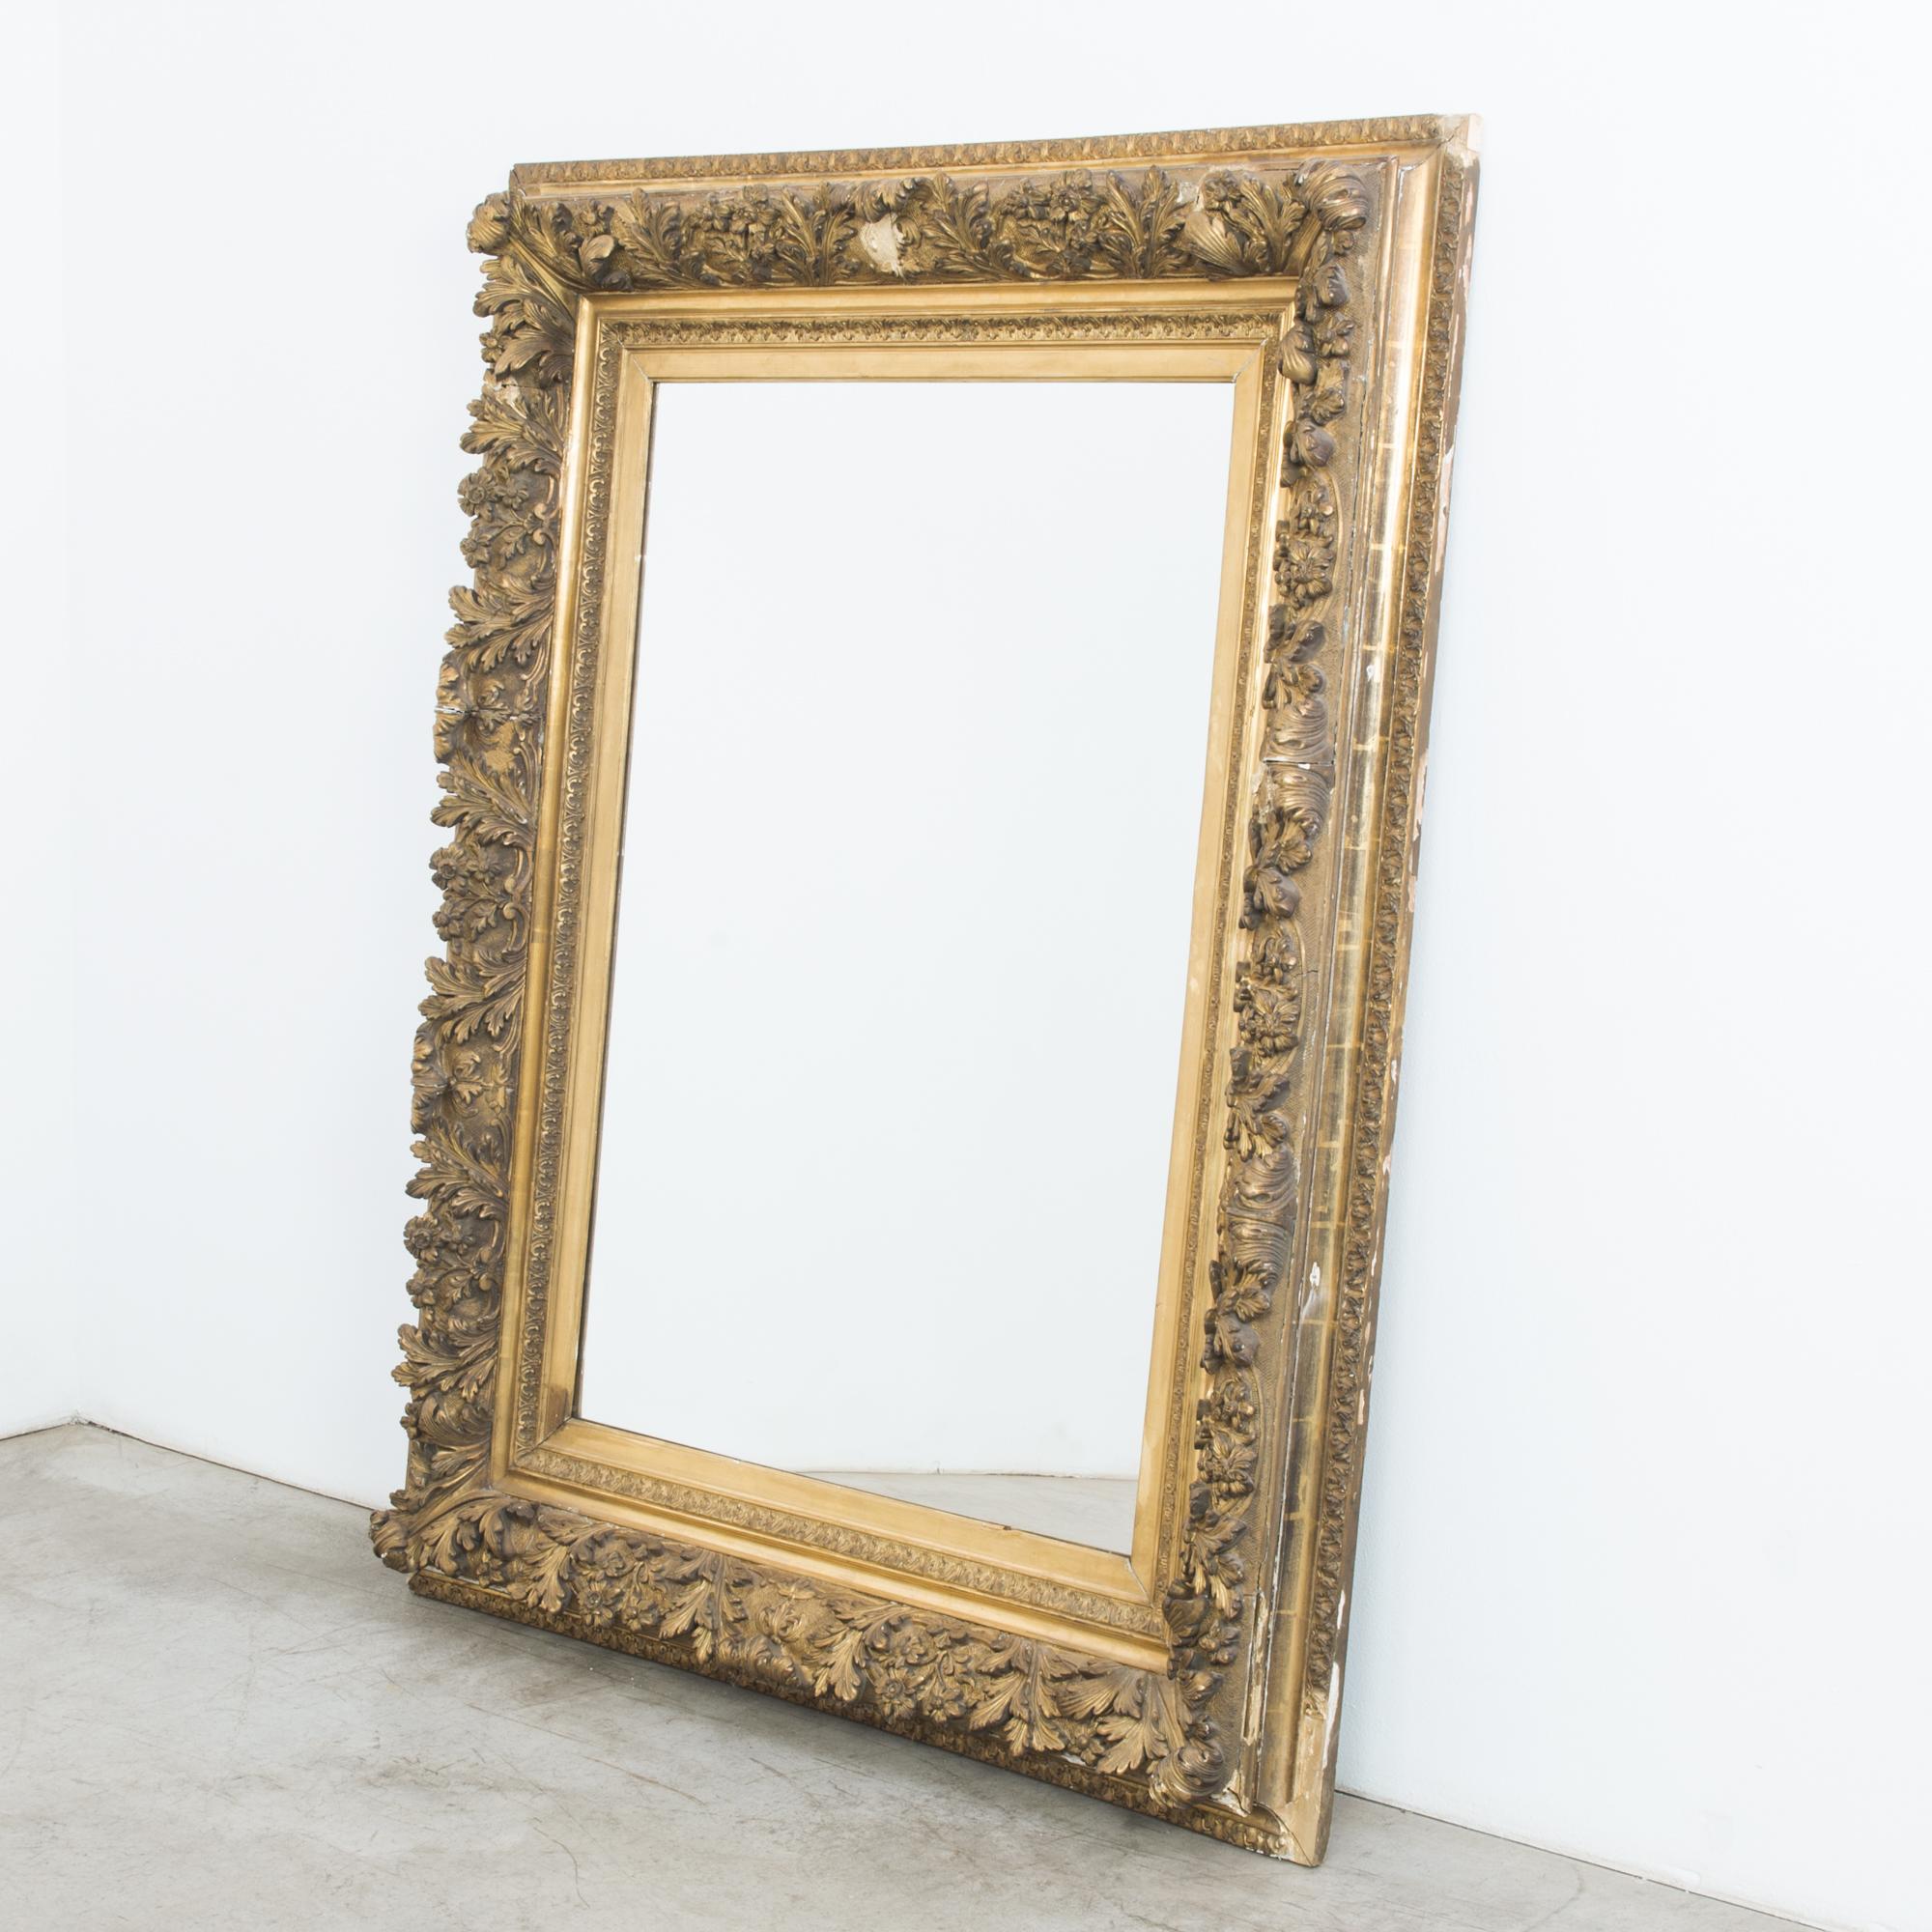 French Provincial 1880s Rococo Gilded Wooden Mirror